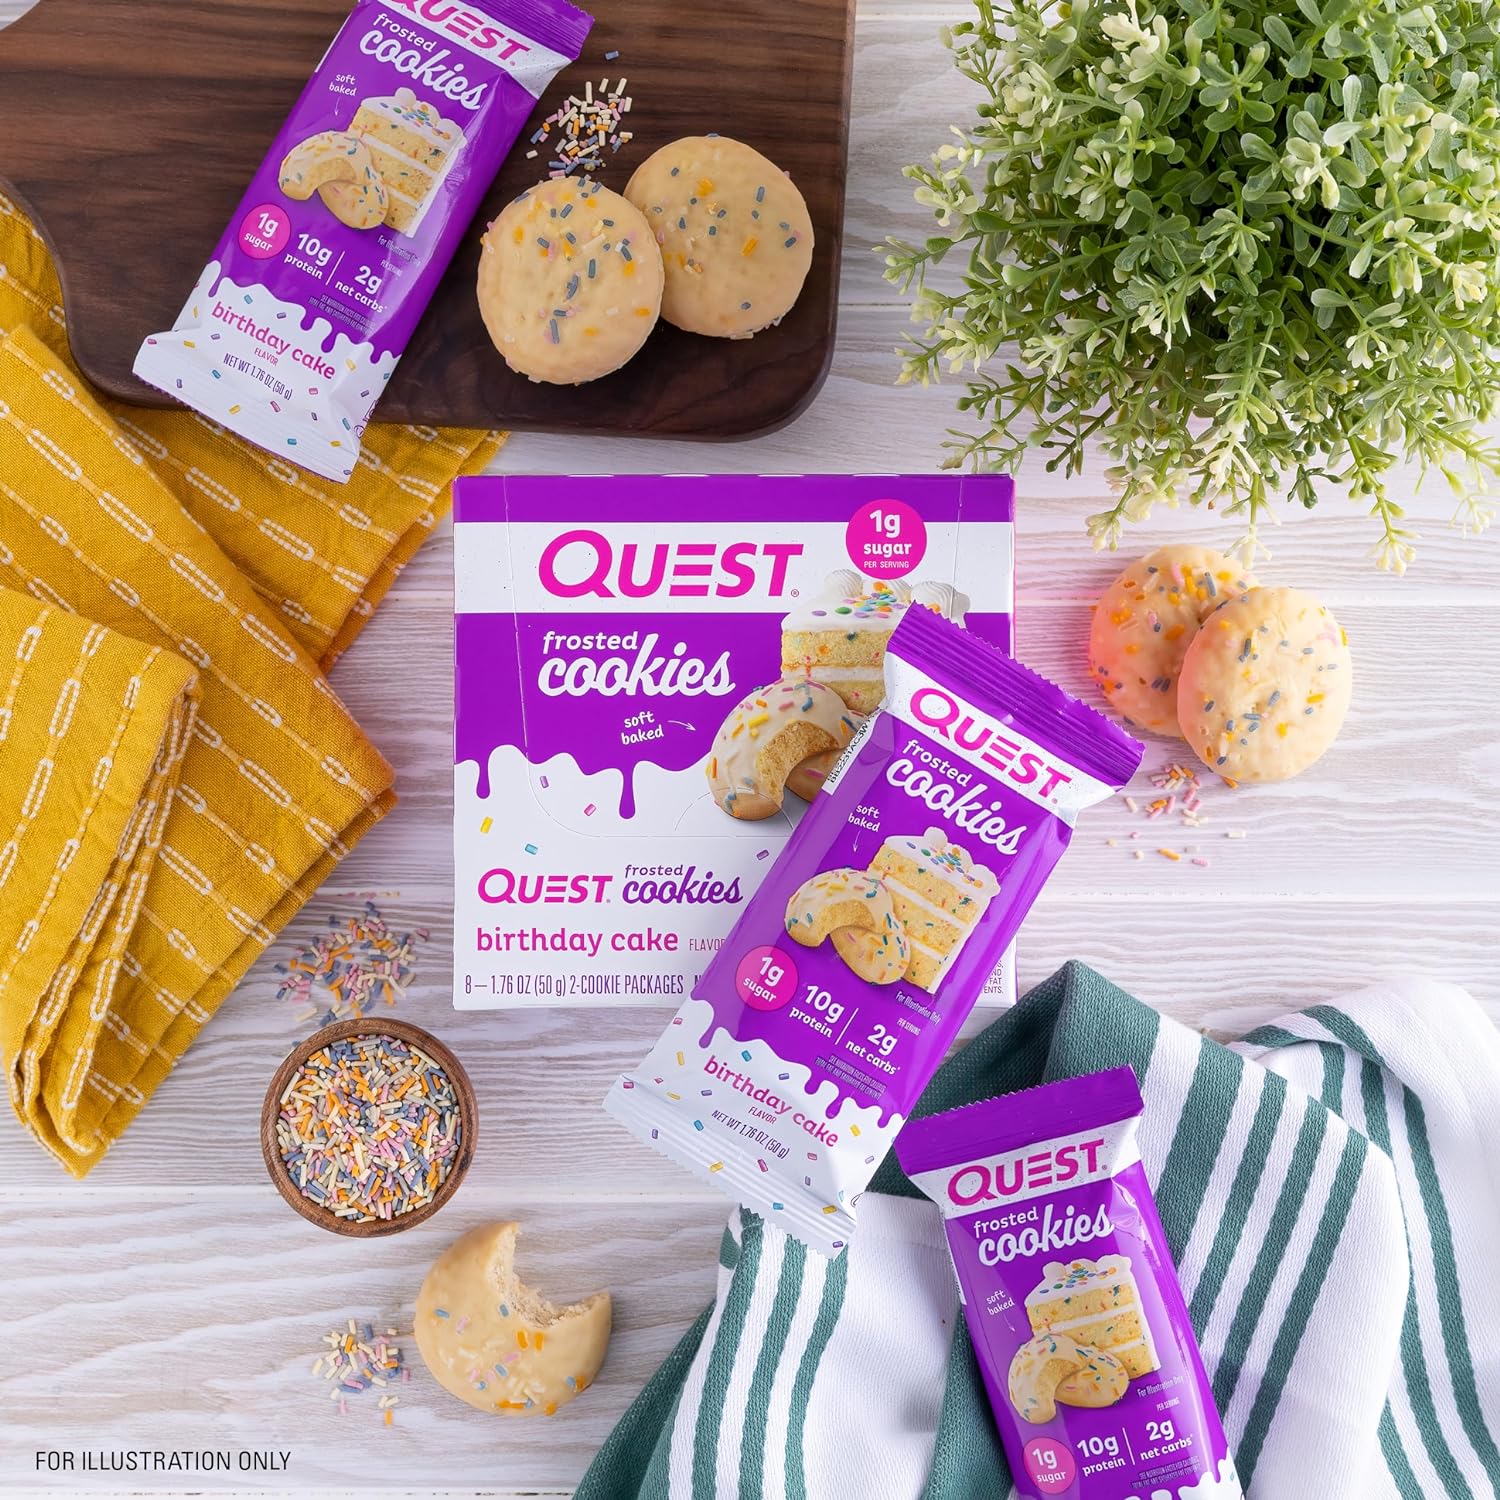 Quest Nutrition Frosted Cookies Twin Pack, Birthday Cake, 1g Sugar, 10g Protein, 2g Net Carbs, Gluten Free, 16 Cookies